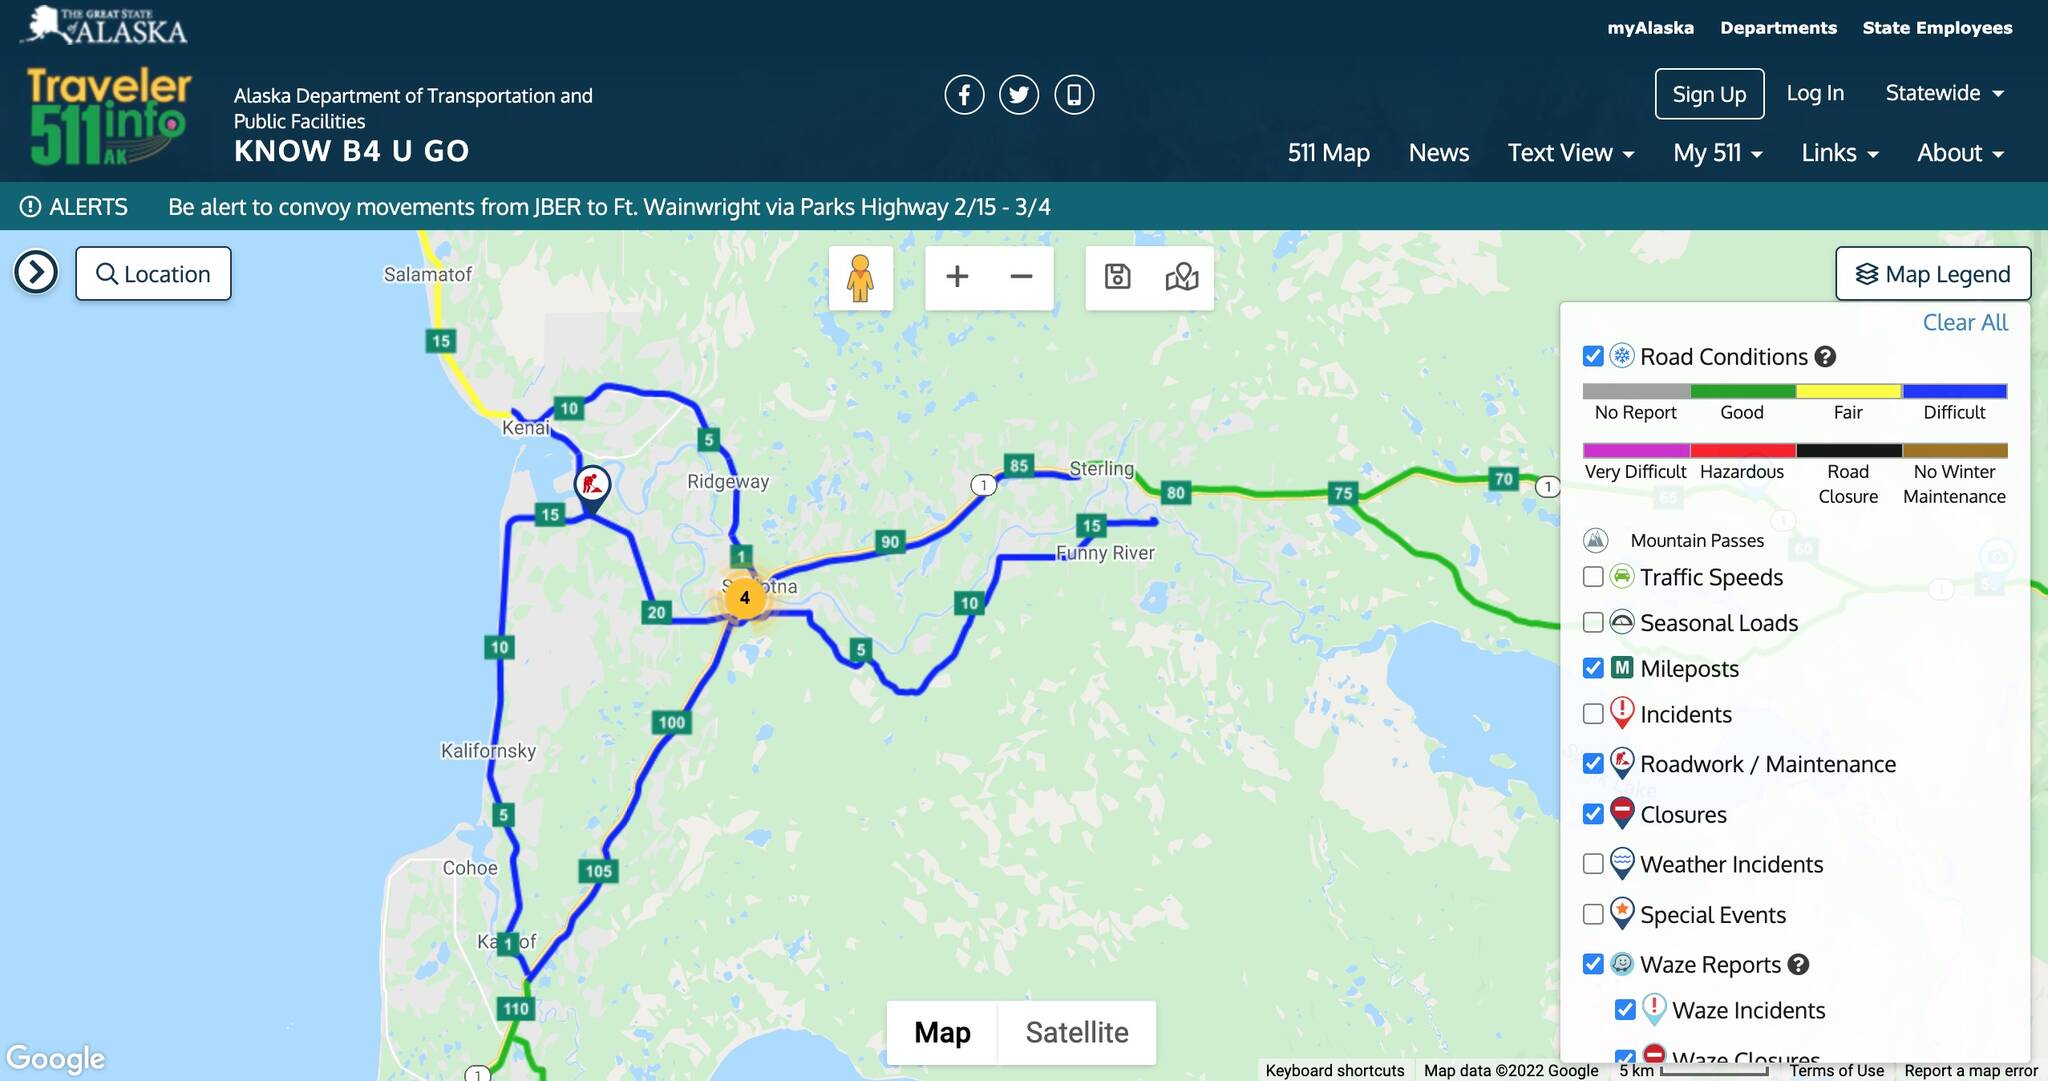 Alaska's 511 app shows travel on central peninsula roads to be "difficult" as of 6:50 p.m. on Monday, Feb. 21, 2022. (Screenshot)